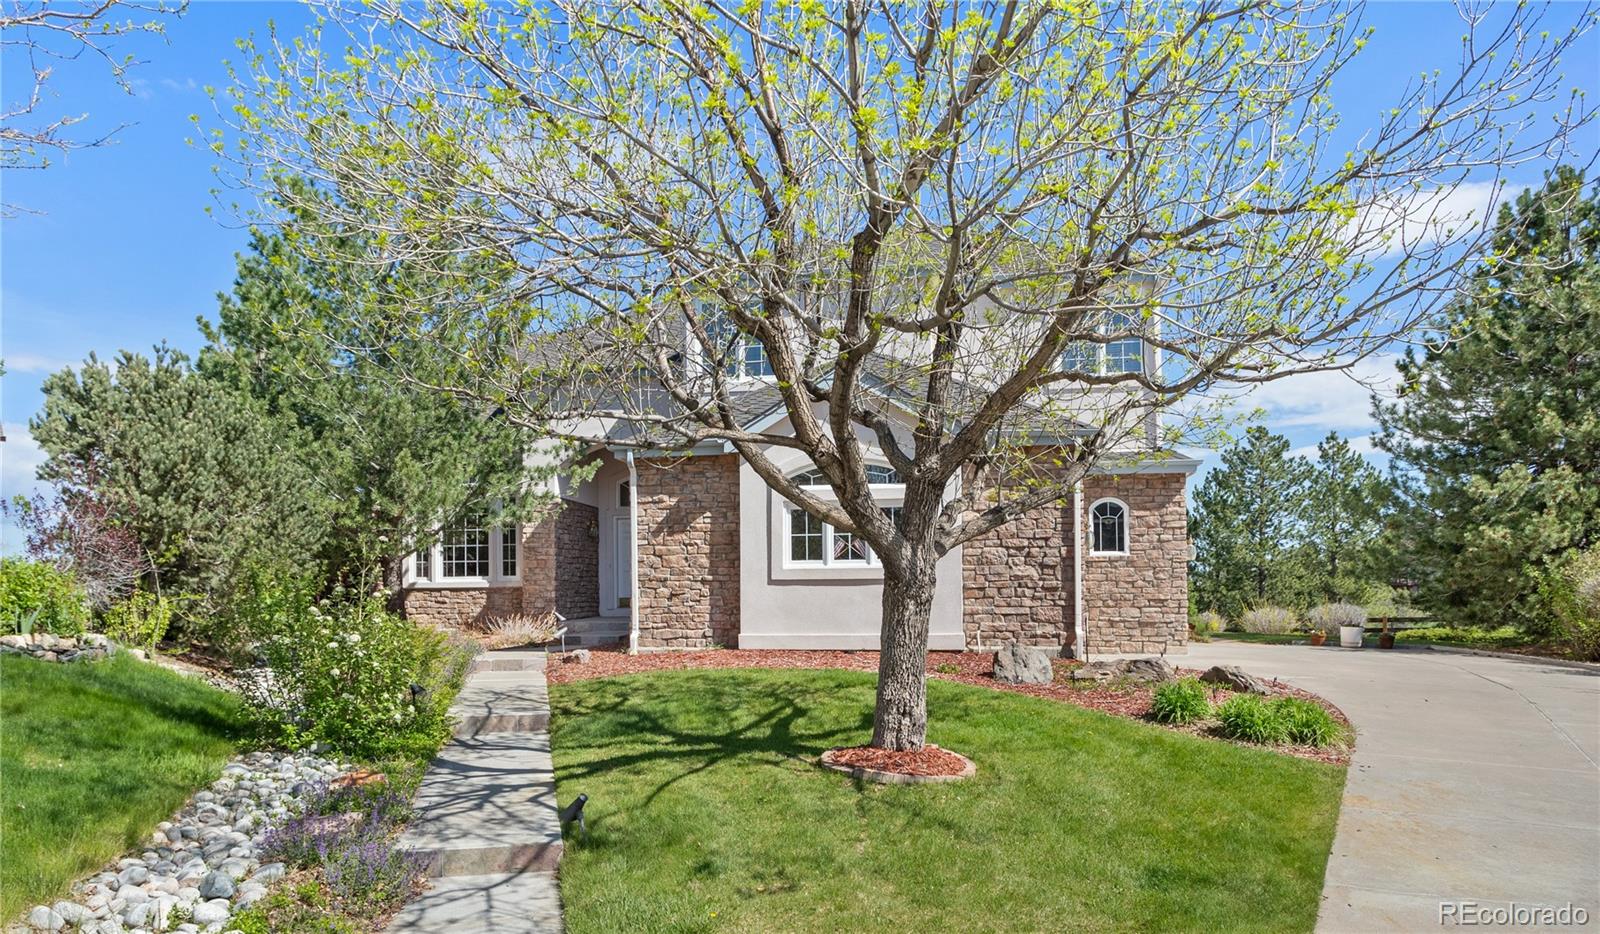 10701  cougar canyon, Littleton sold home. Closed on 2024-01-03 for $910,000.